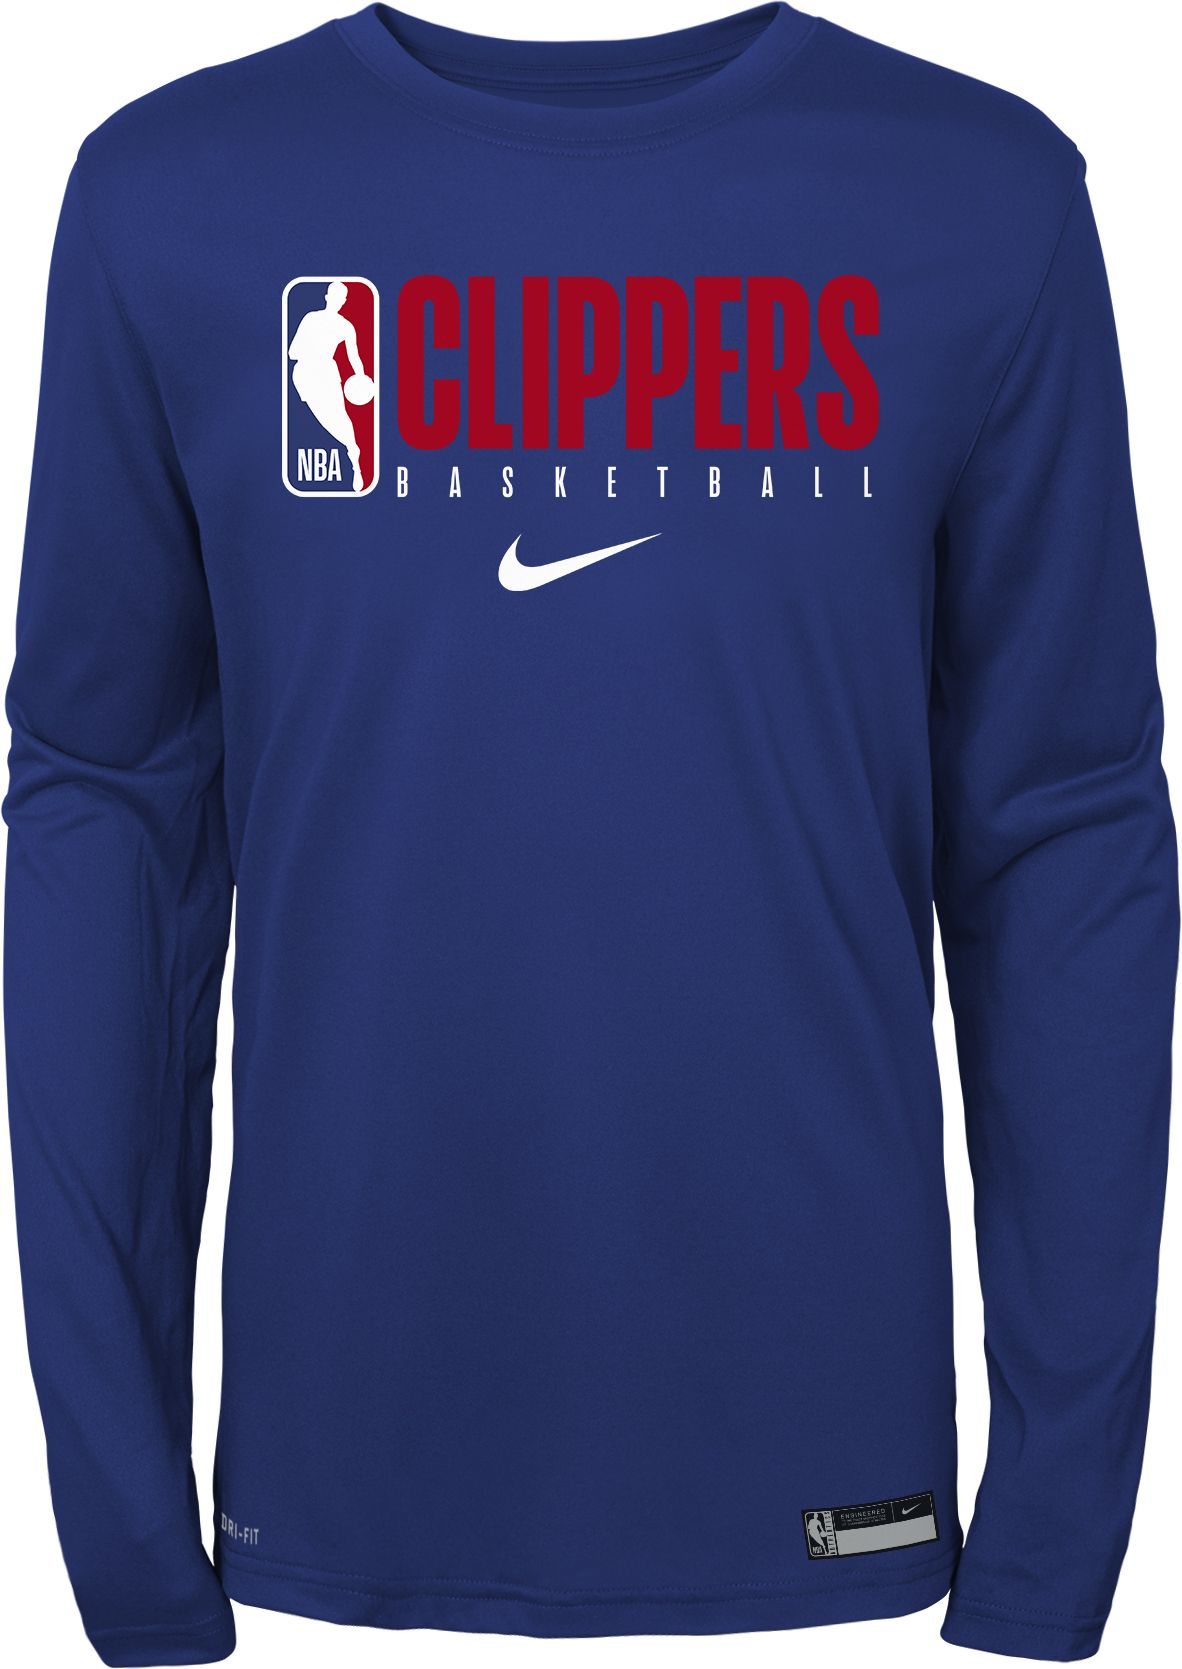 Los Angeles Clippers Apparel & Gear | Curbside Pickup Available at DICK'S